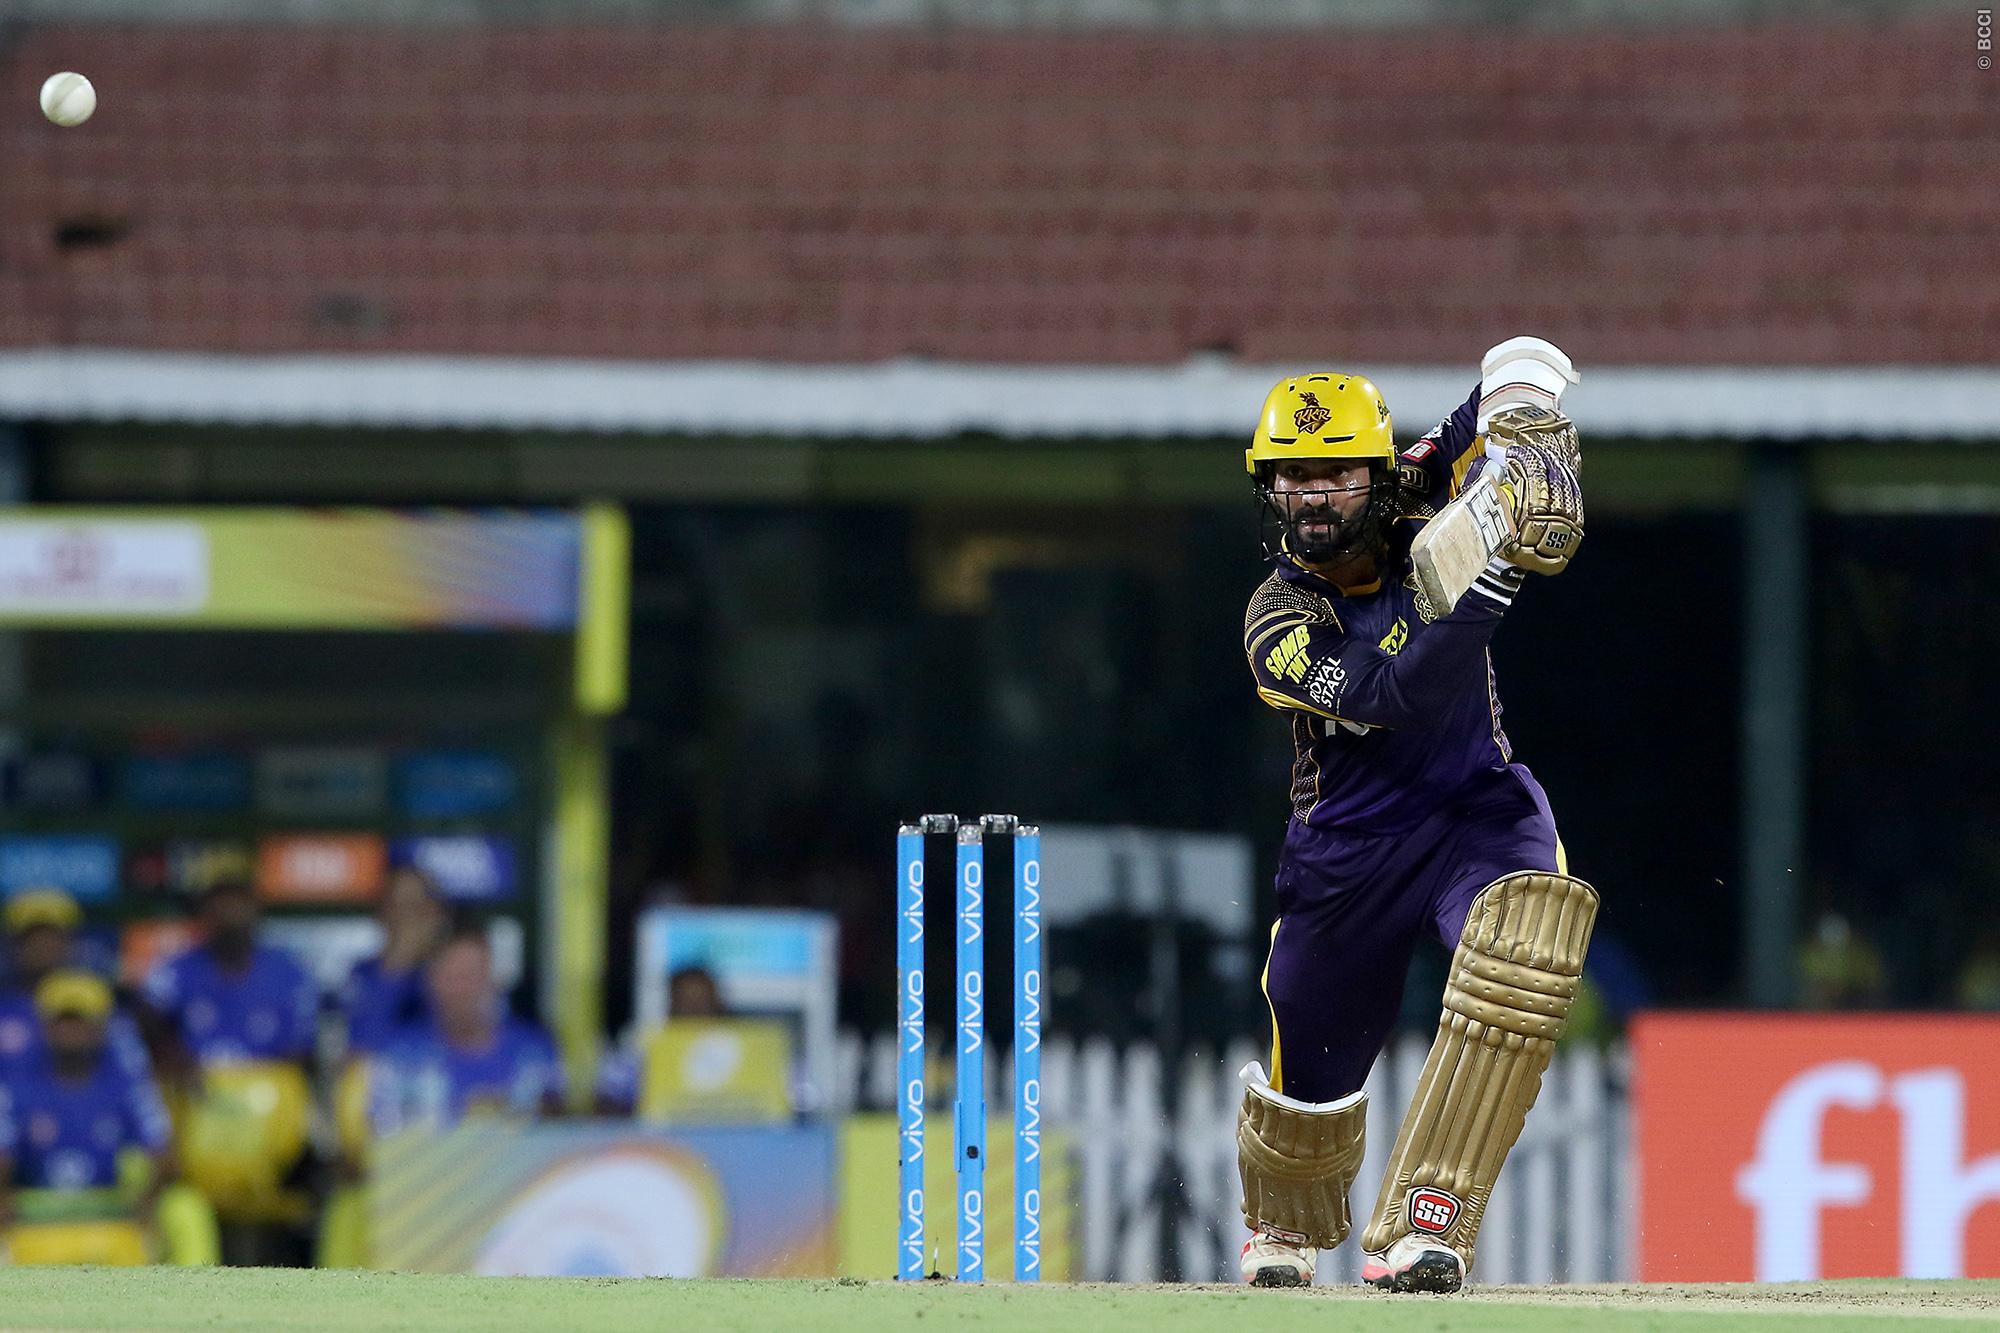 Dinesh Karthik needs two good IPLs to be in 2021 World Cup squad, opines Aakash Chopra